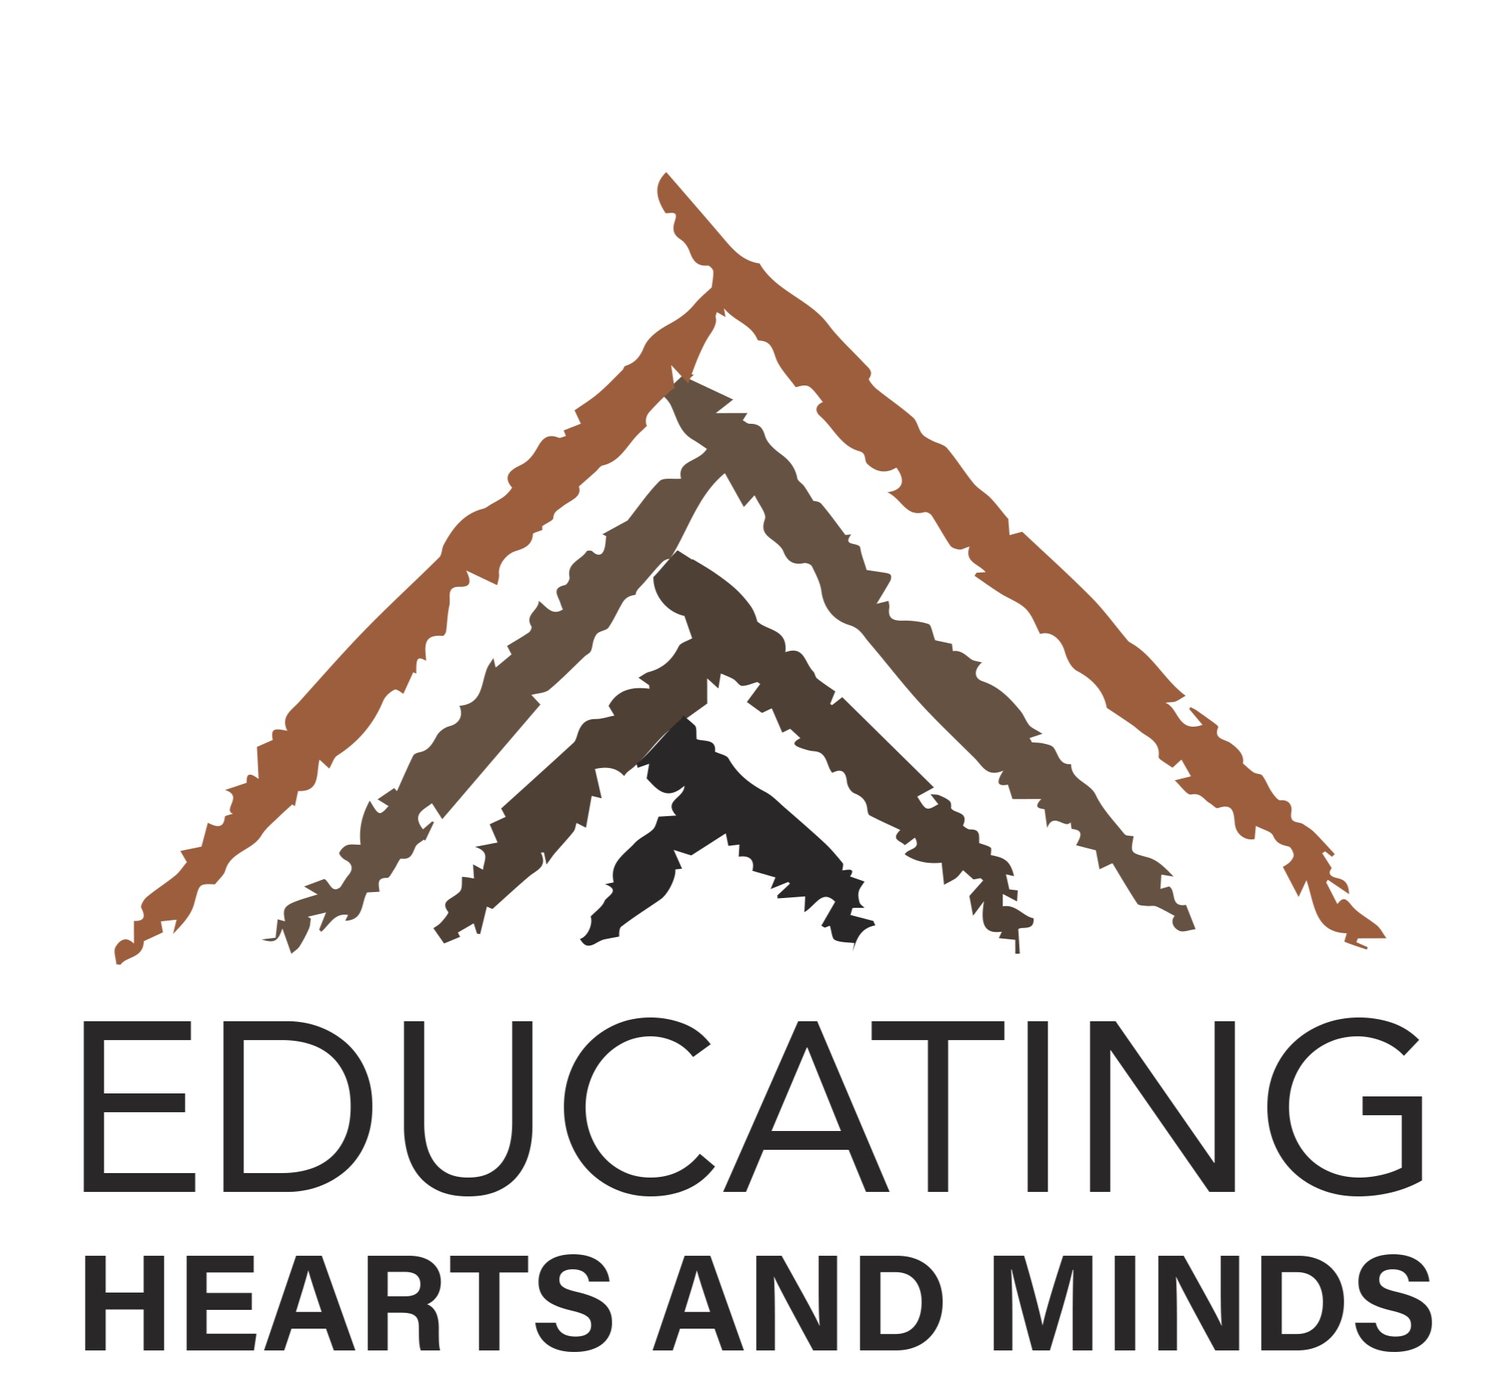 Educating Hearts and Minds